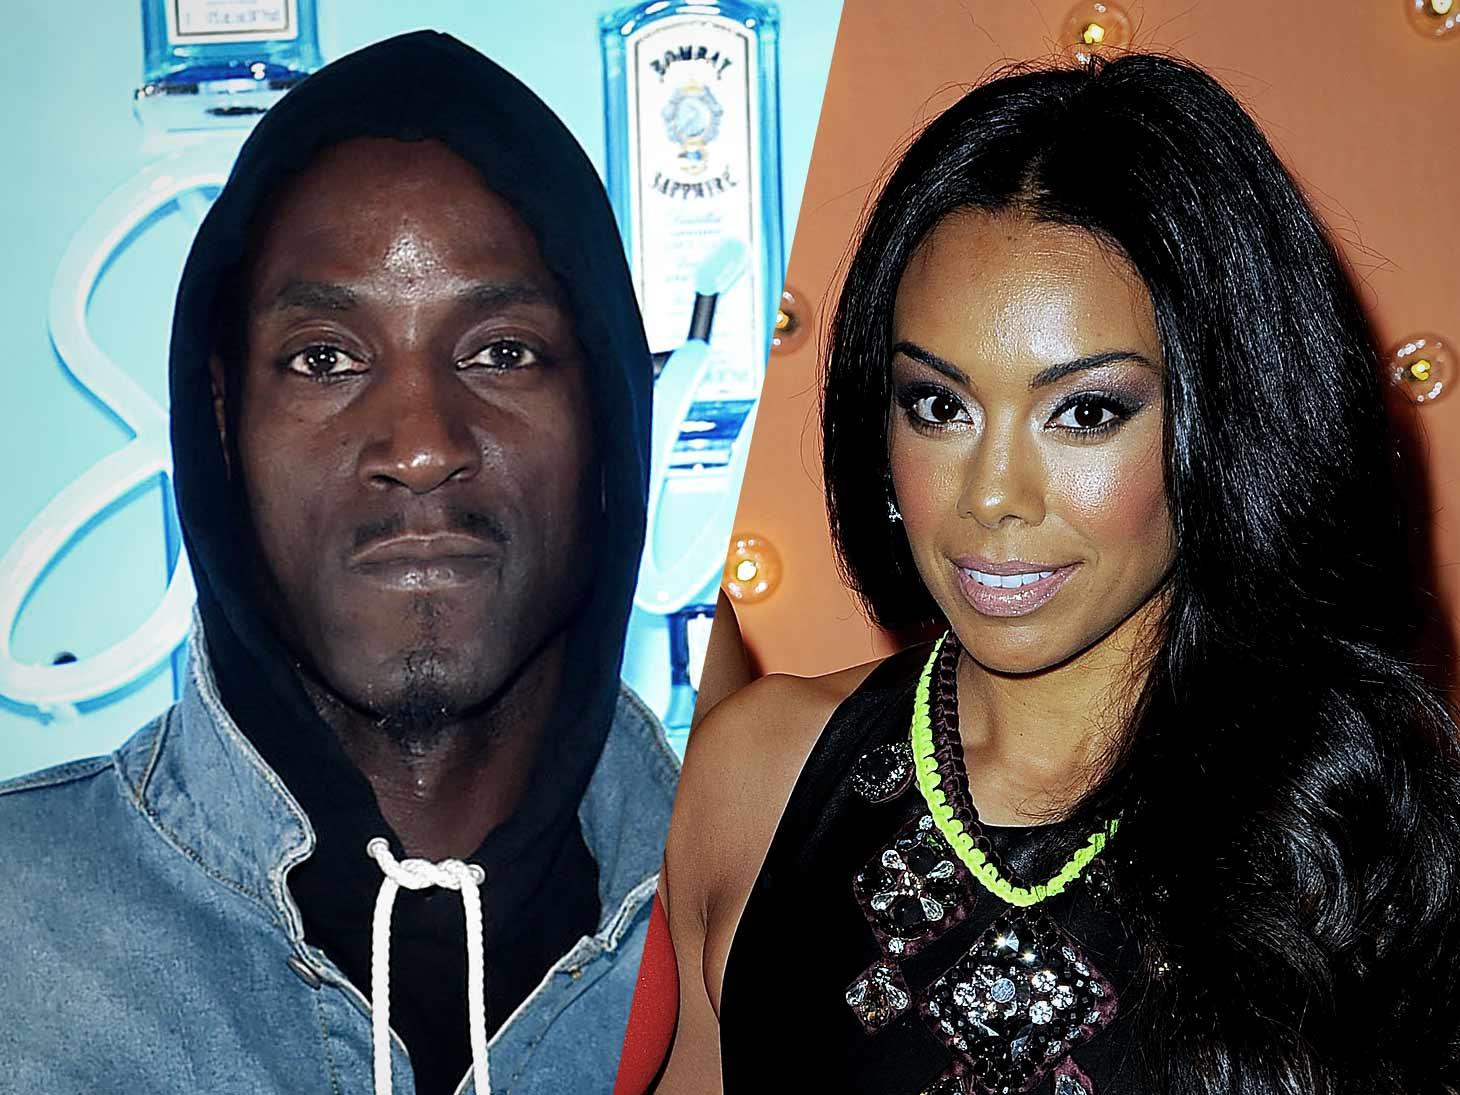 Kevin Garnett Does Not Want to Pay Estranged Wife Spousal Support